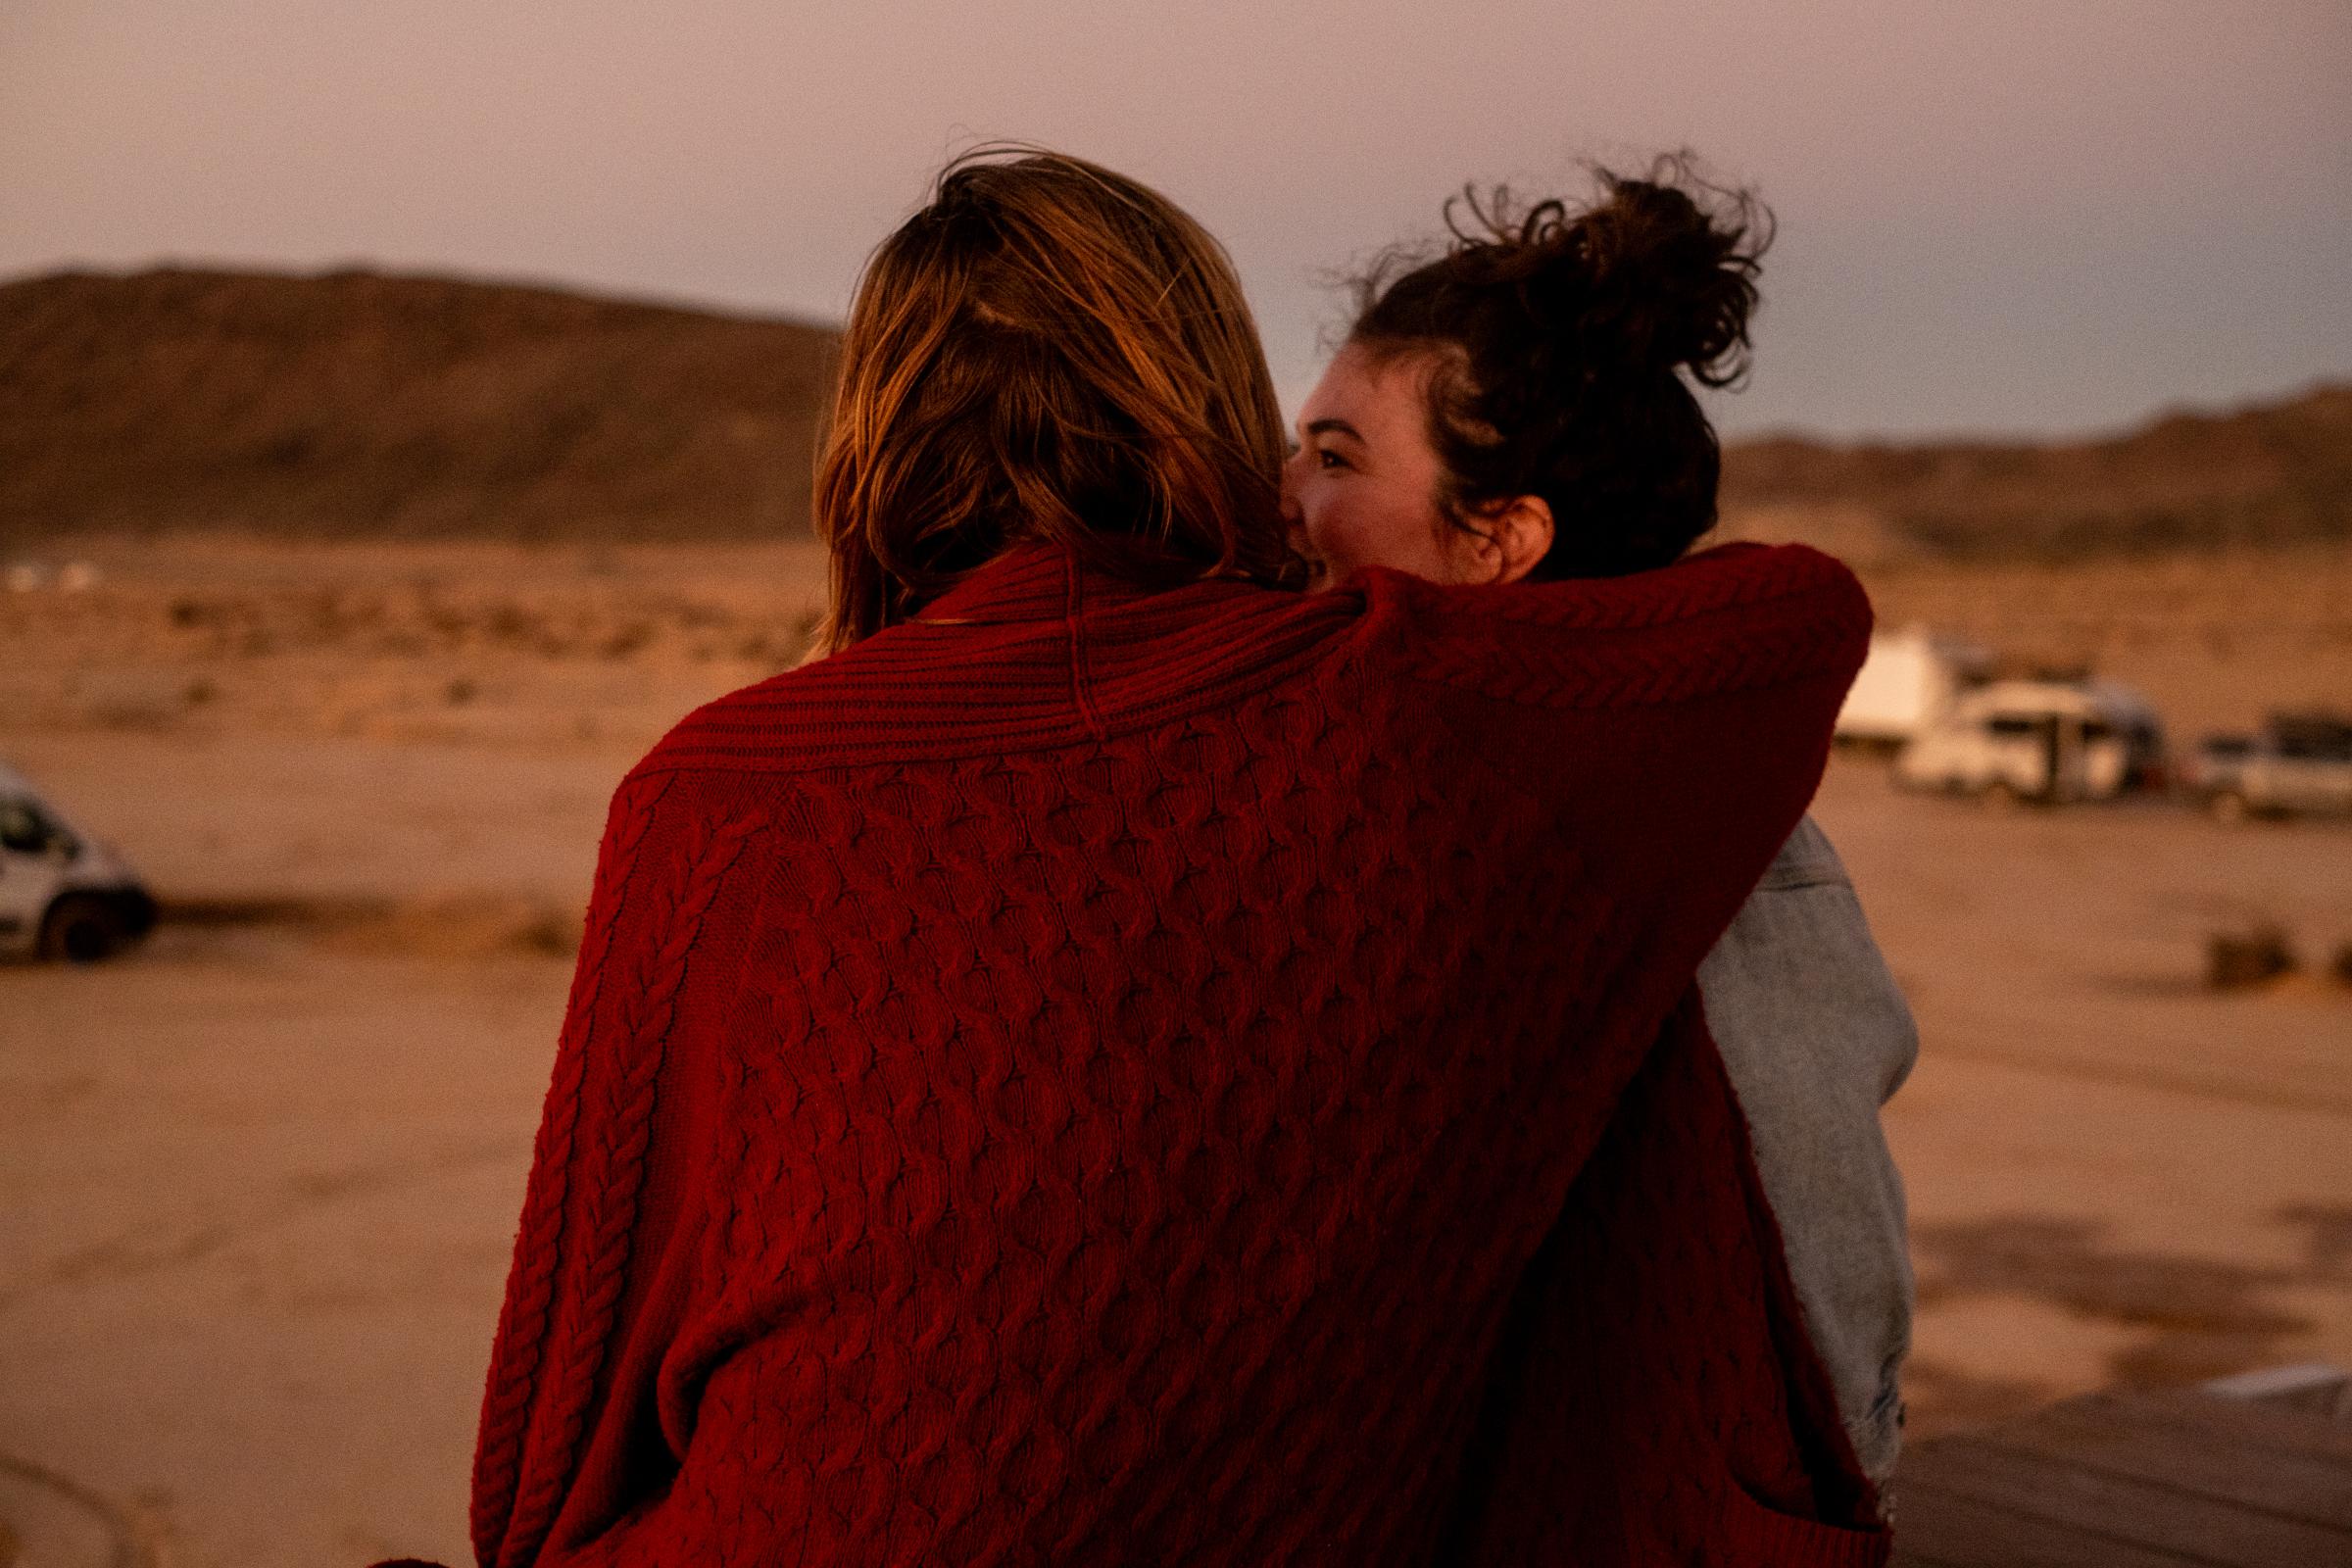 A Warm Winter (An Ongoing Journey) - Grace and Dylan. Sunfair Dry Lake, Joshua Tree, California.